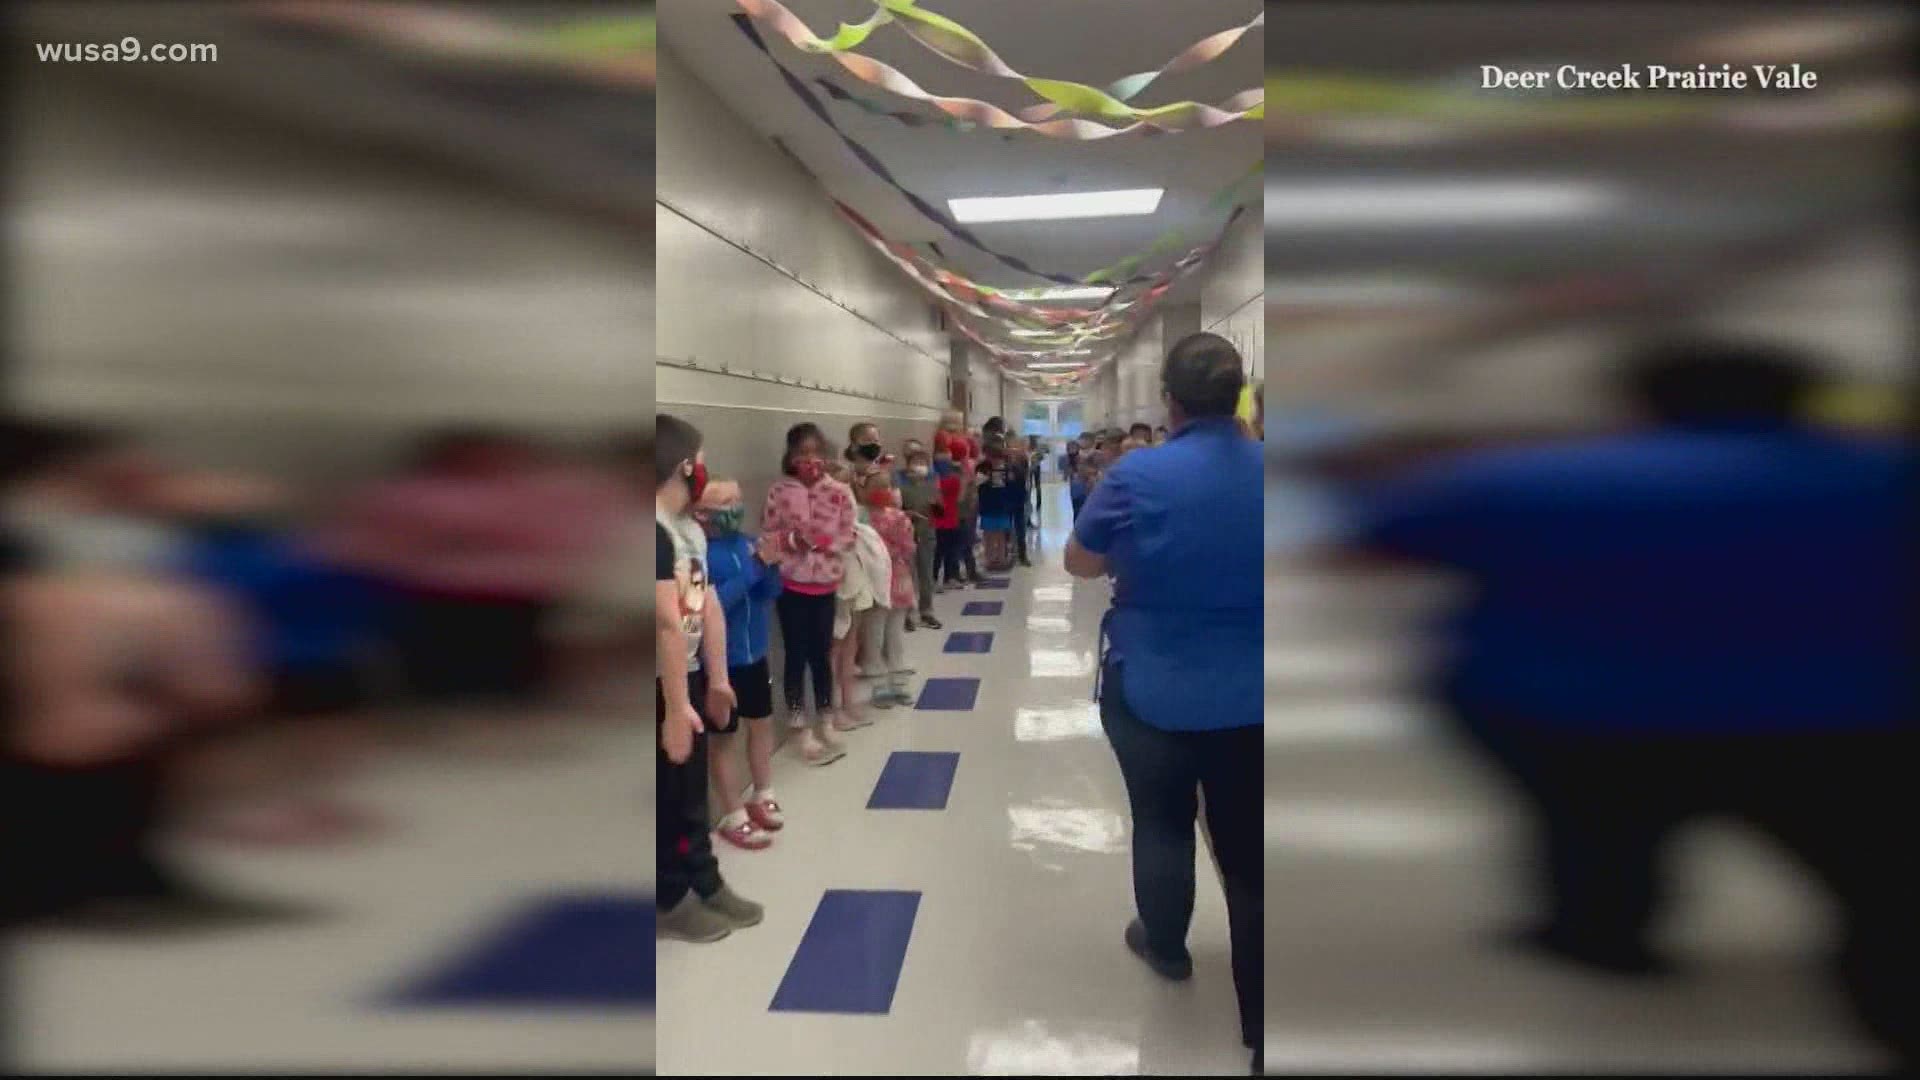 The students chanted "U.S.A!" through the halls to show her some love and to celebrate her huge accomplishment. This moment of uplifting was so beautiful to watch!